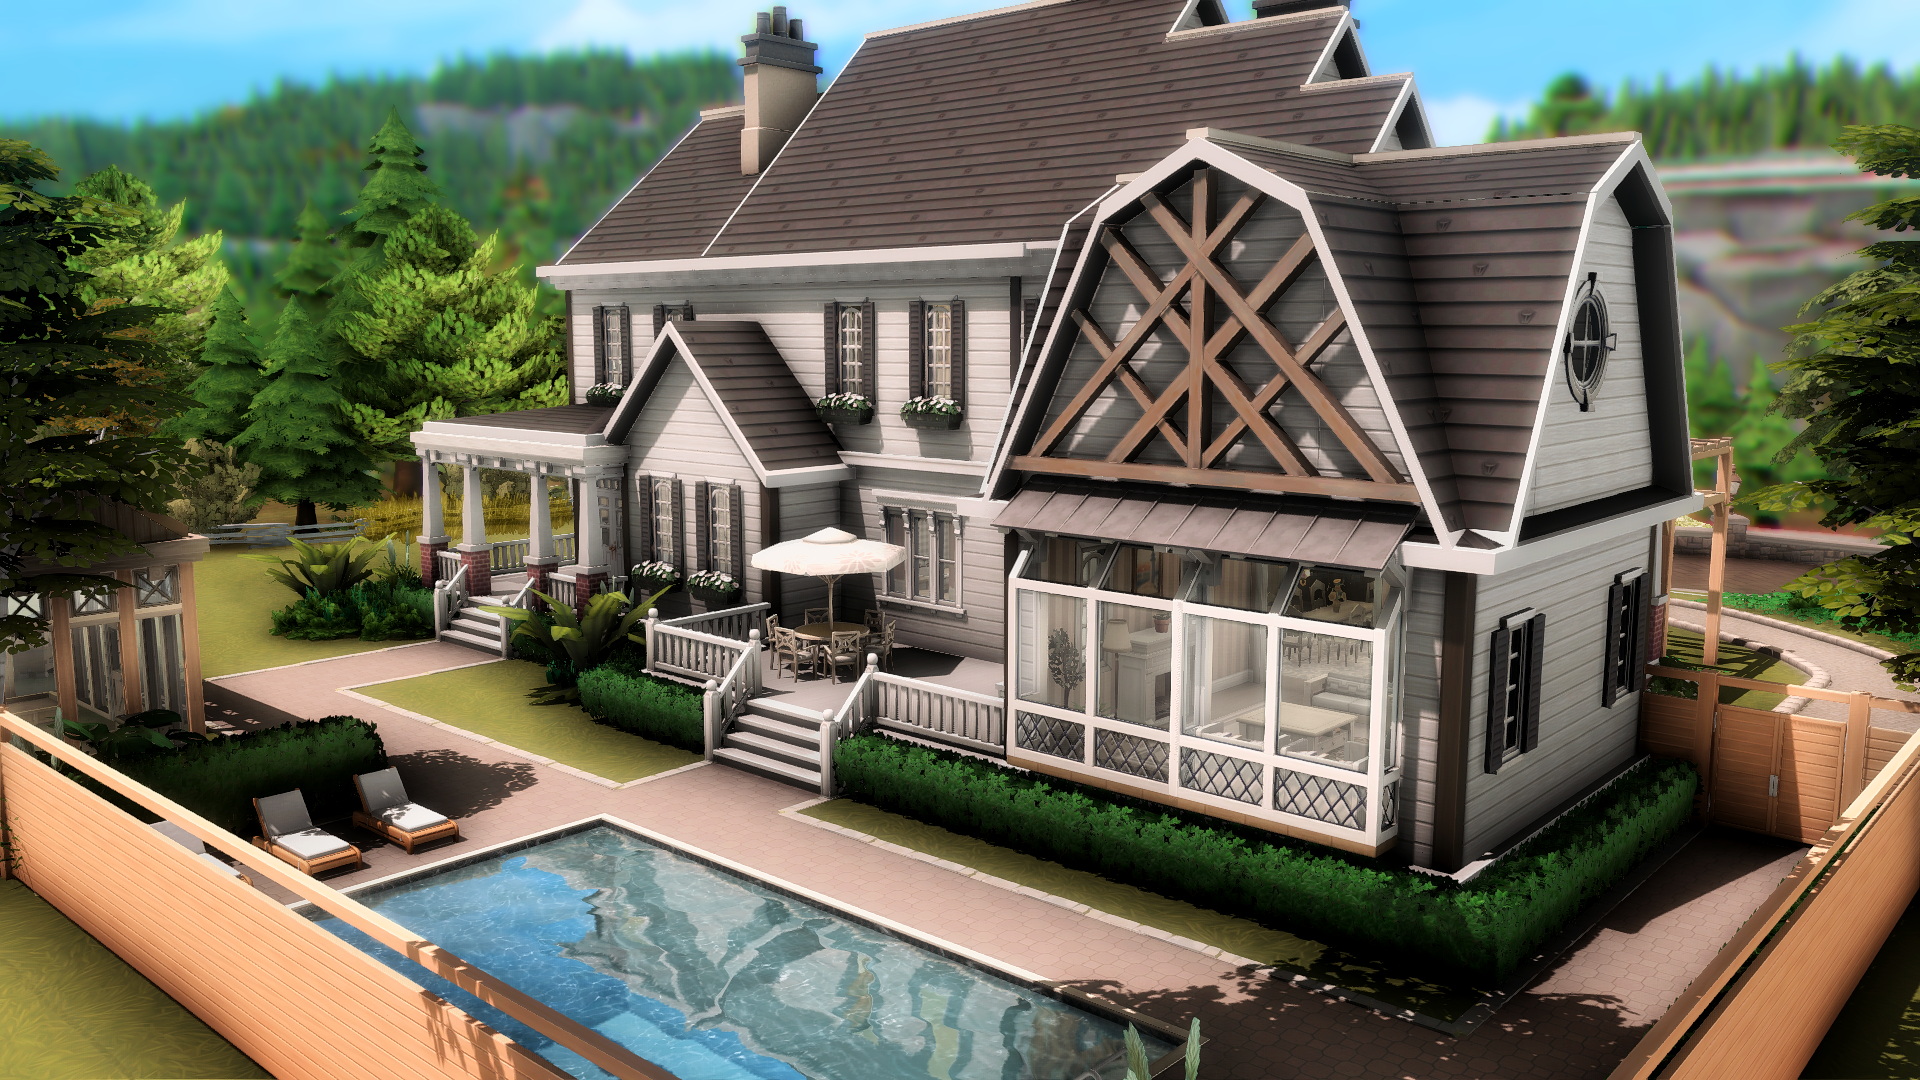 Country Familiar House by plumbobkingdom at Mod The Sims 4 » Sims 4 Updates